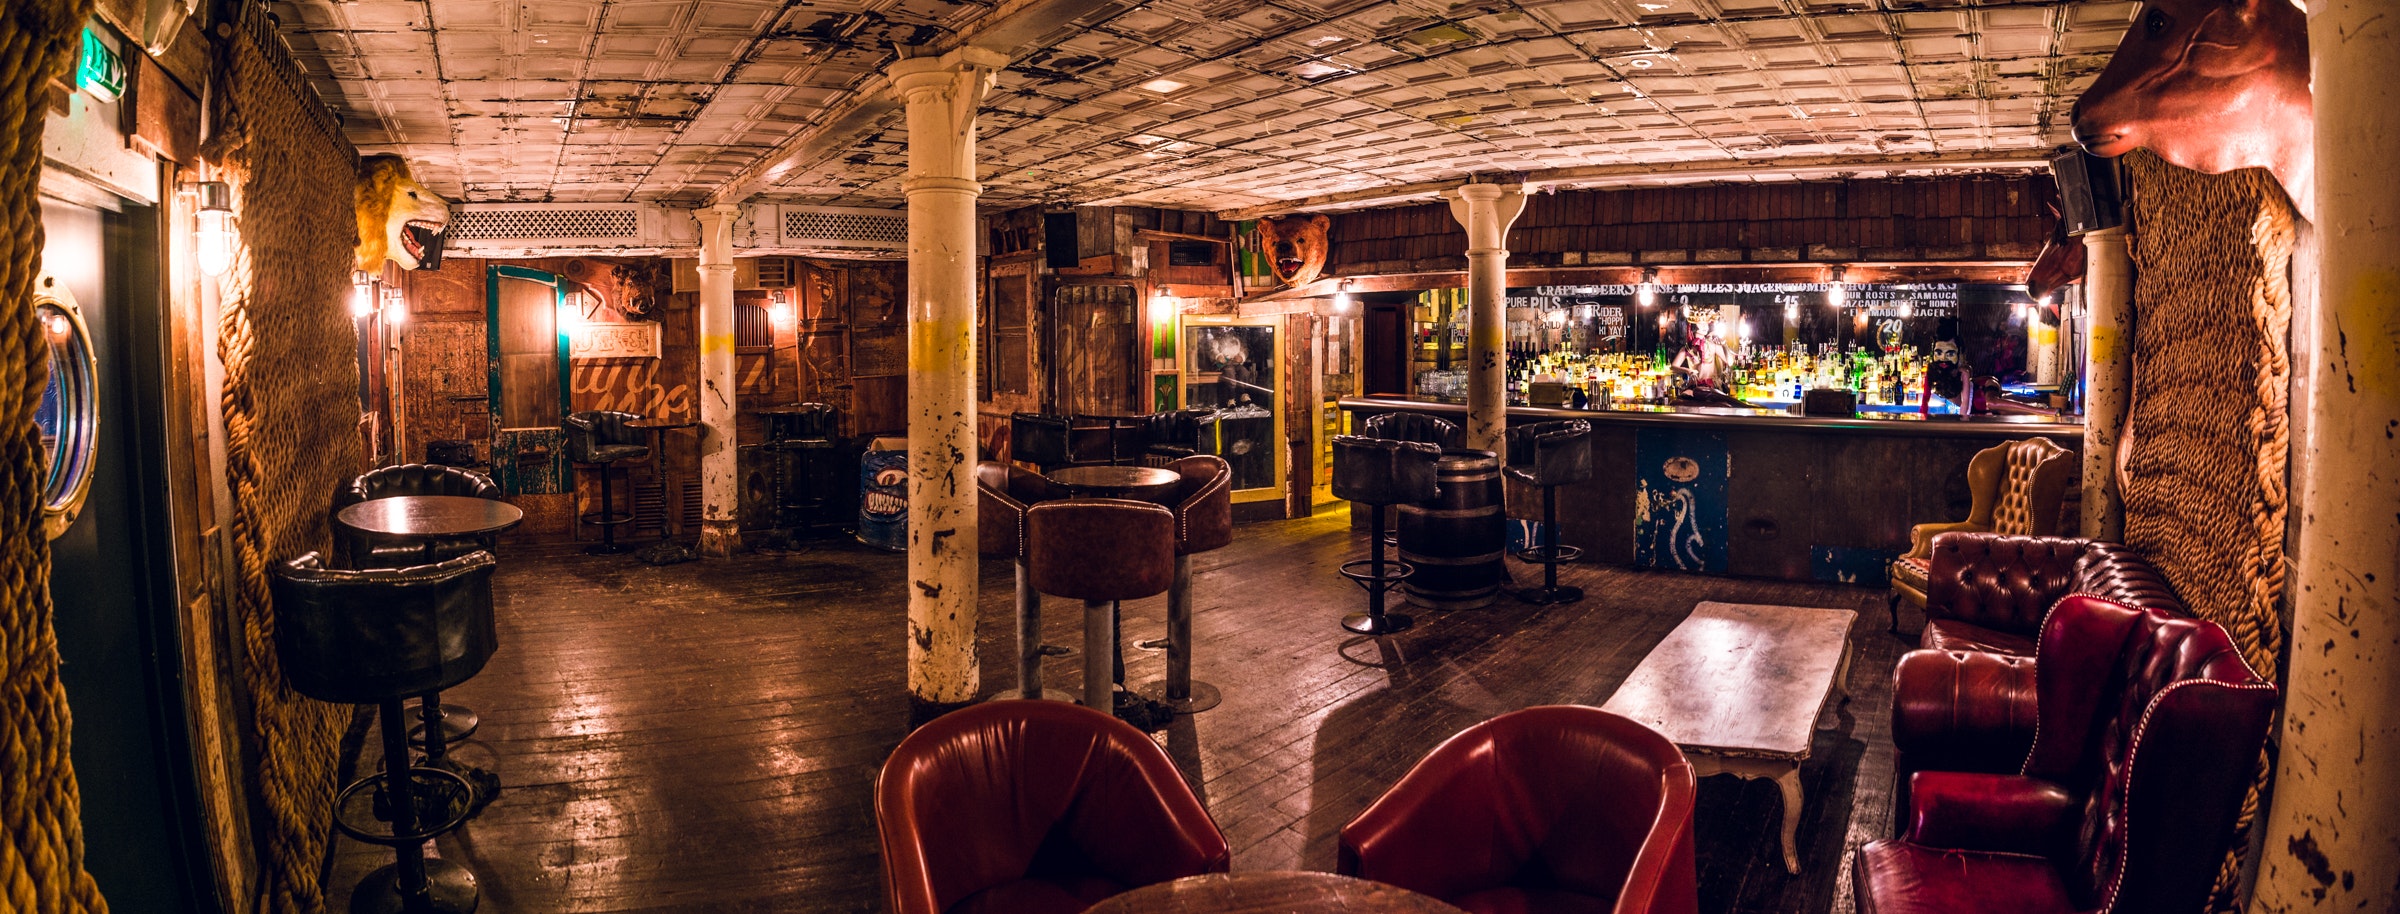 Event Venues in East London - The Blues Kitchen Shoreditch 